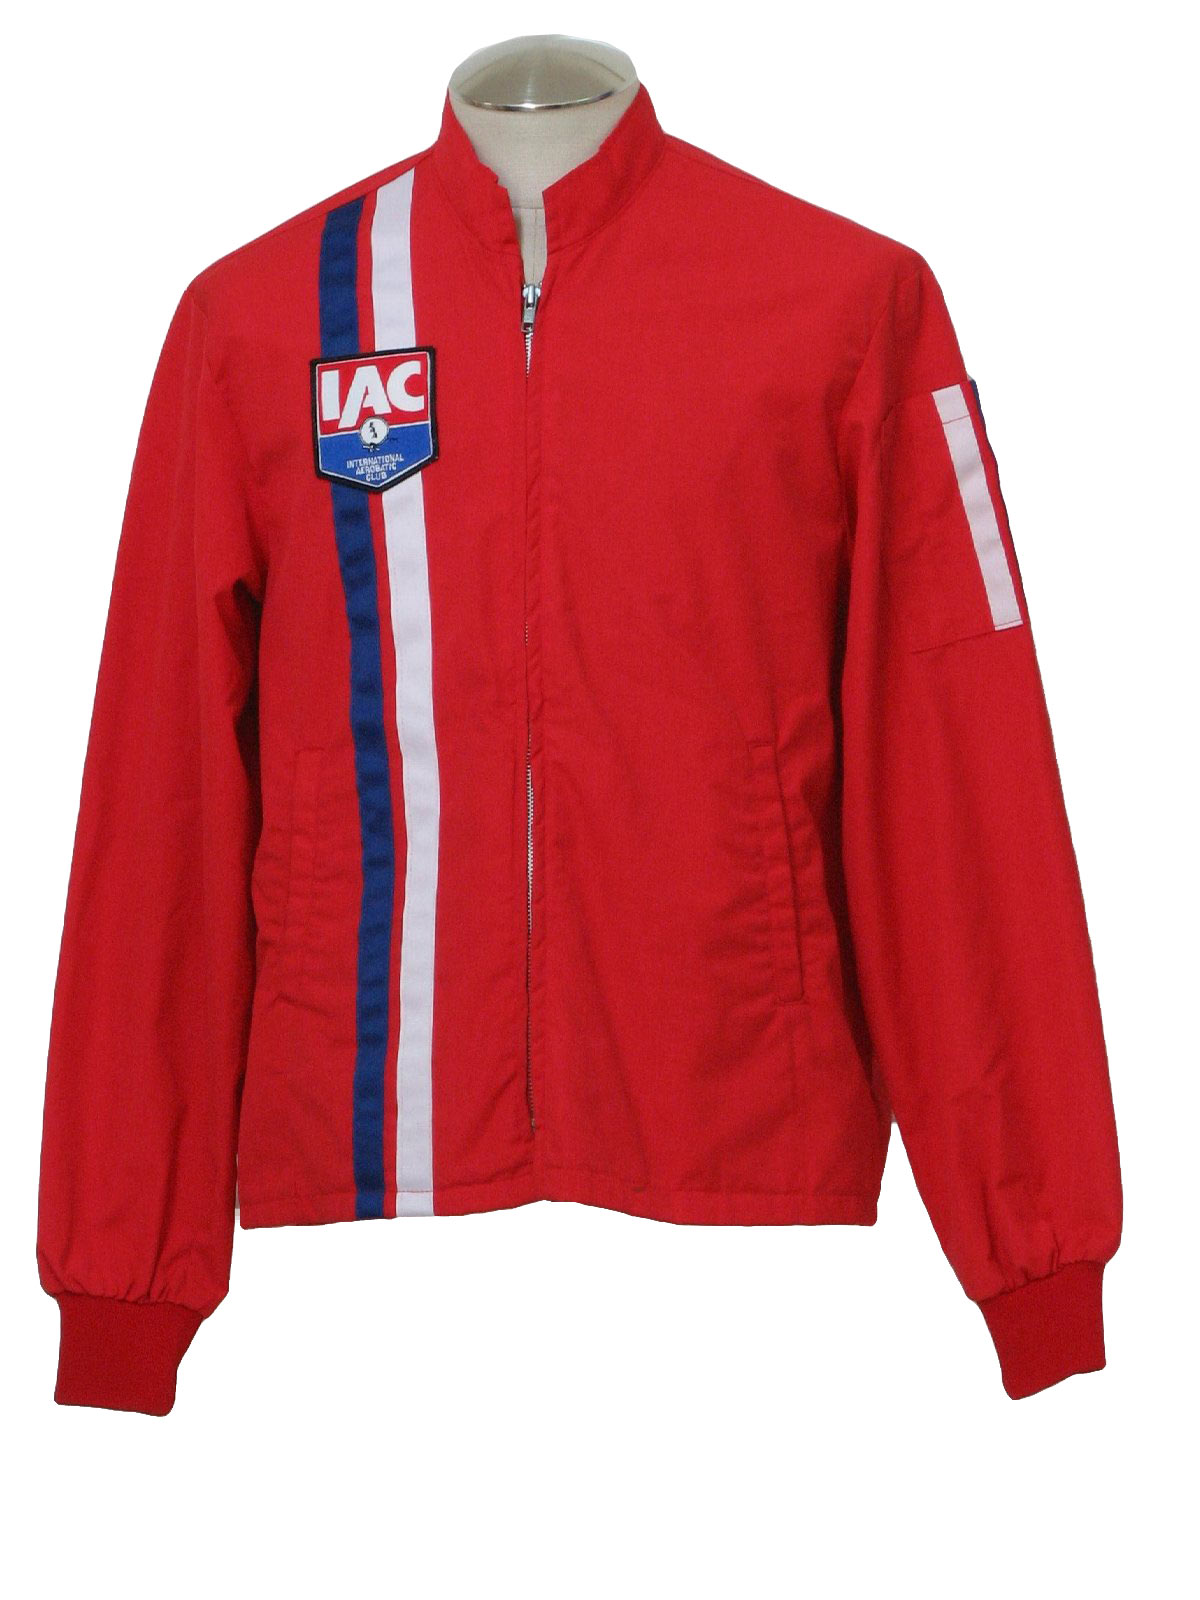 Vintage care label 1970s Jacket: 70s -care label- Mens red, white and ...